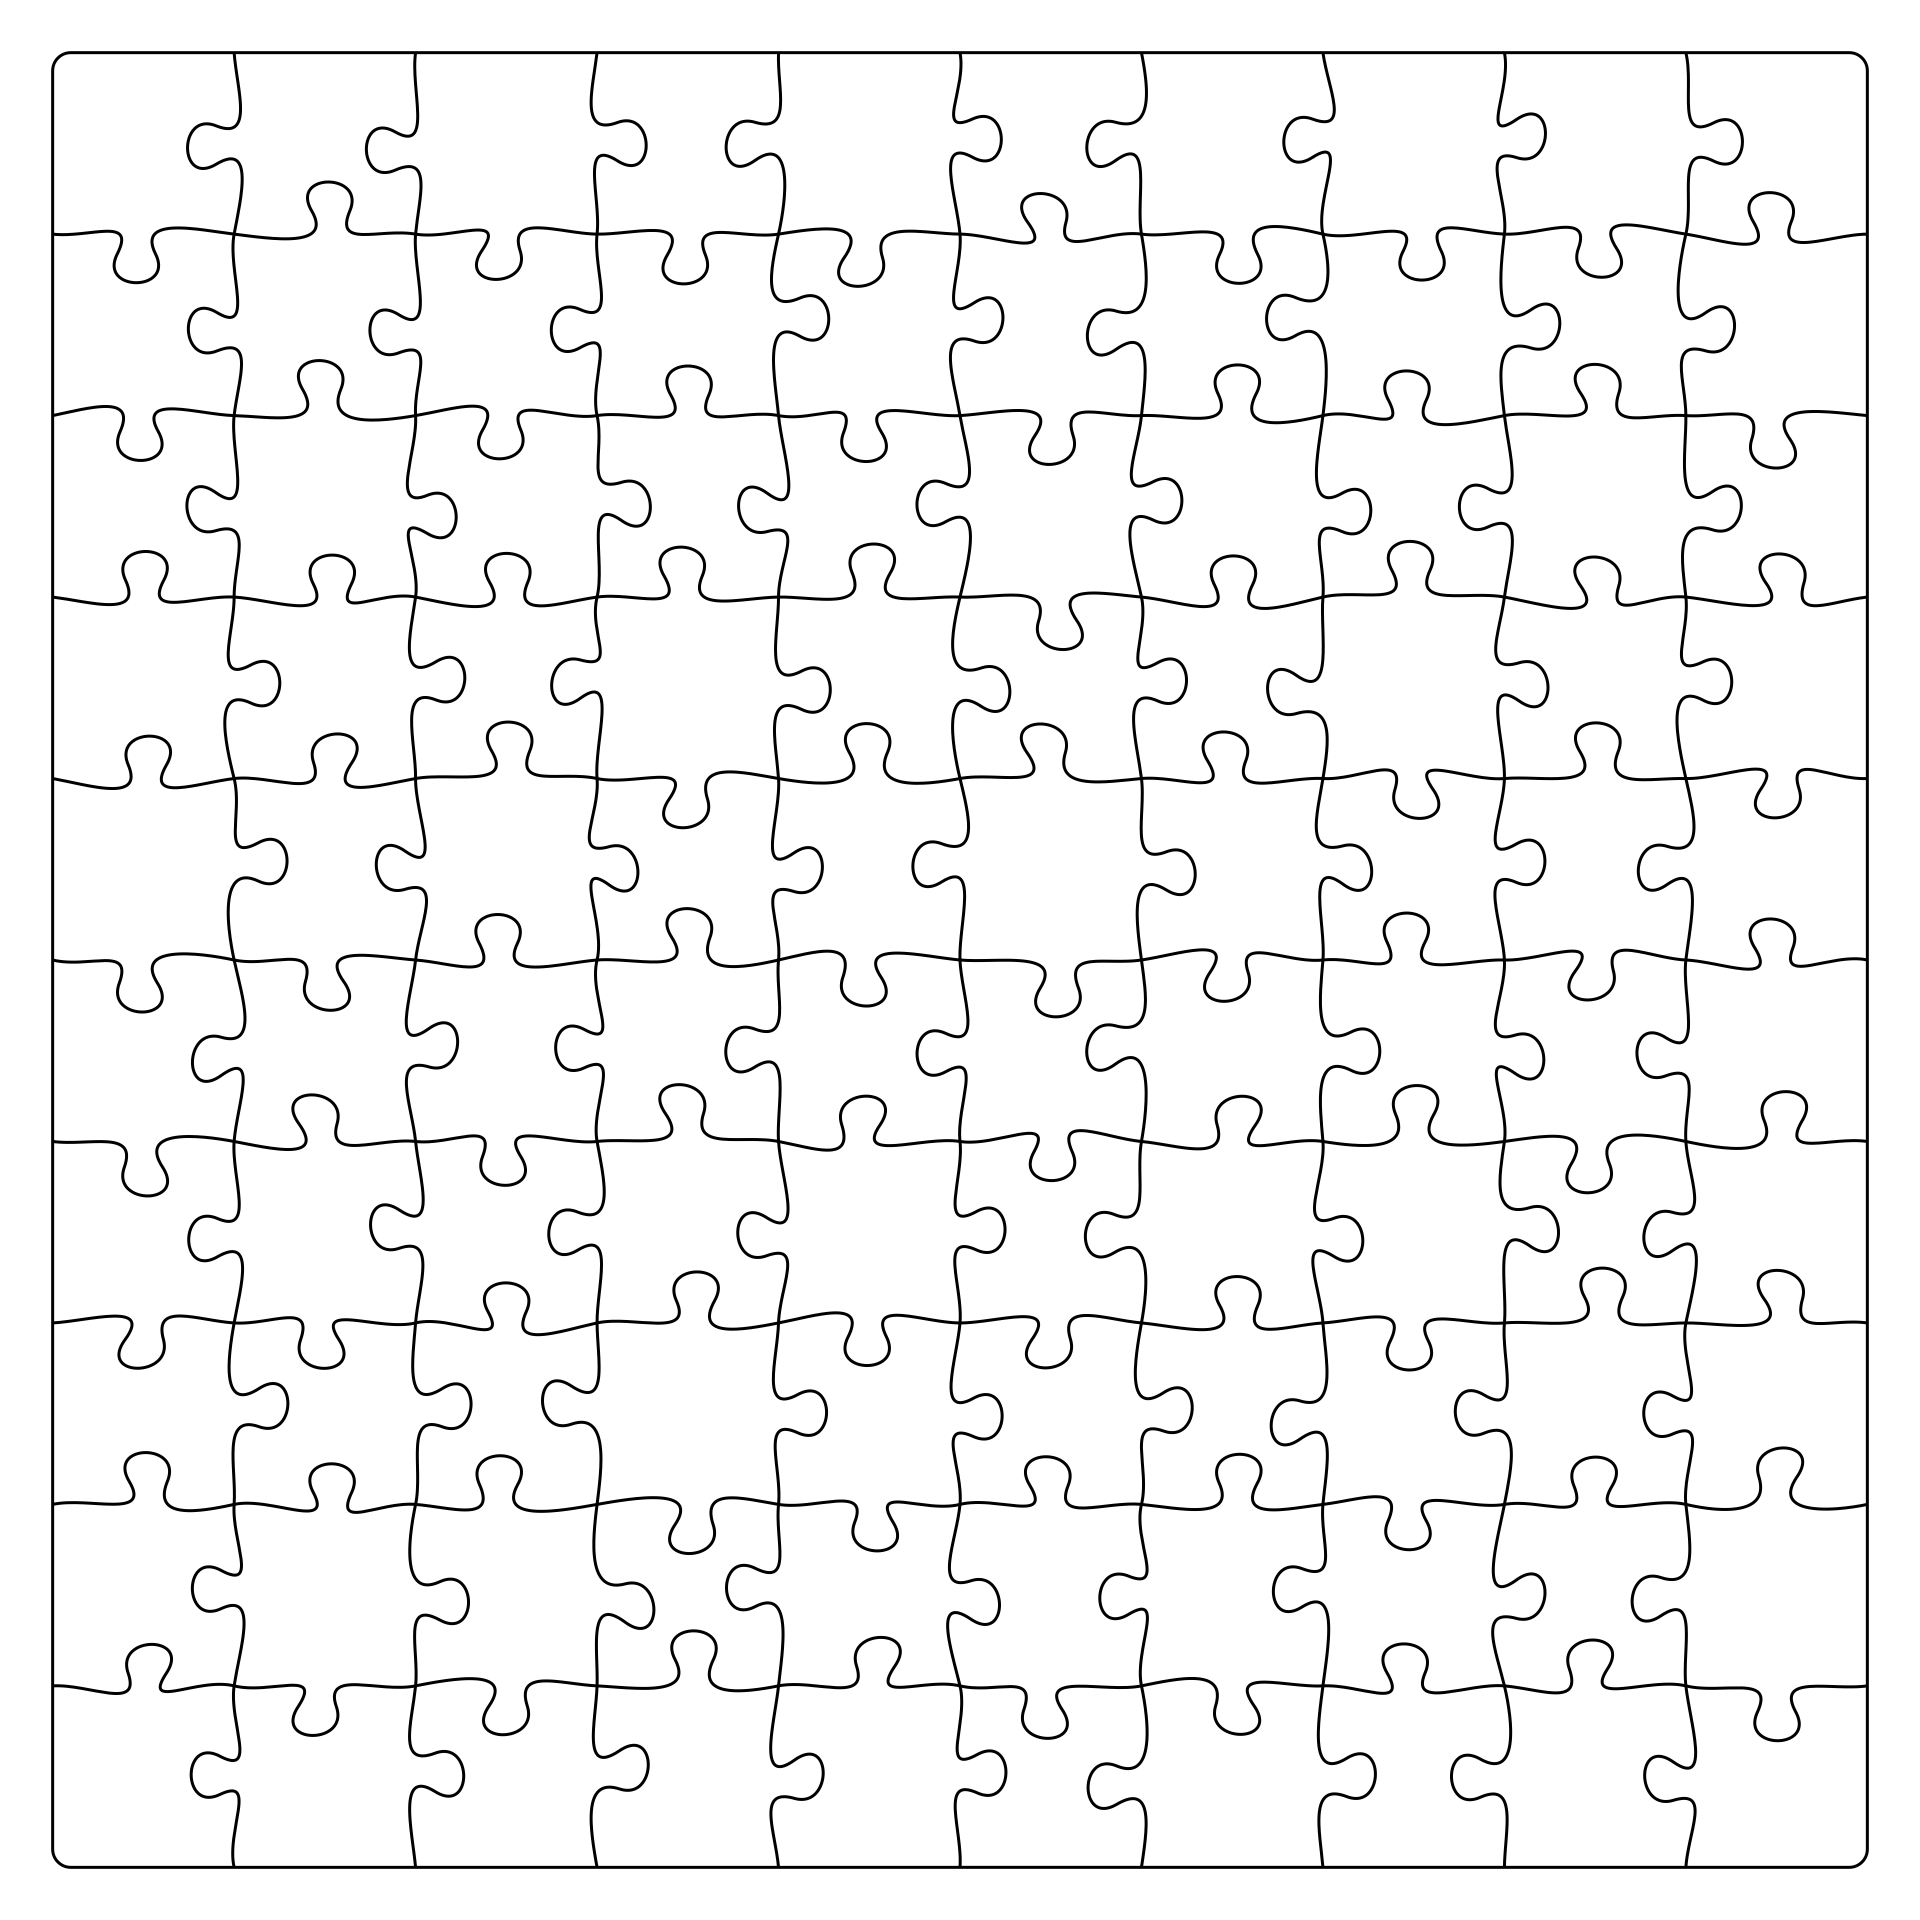 download-jigsaw-puzzle-template-full-size-png-image-pngkit